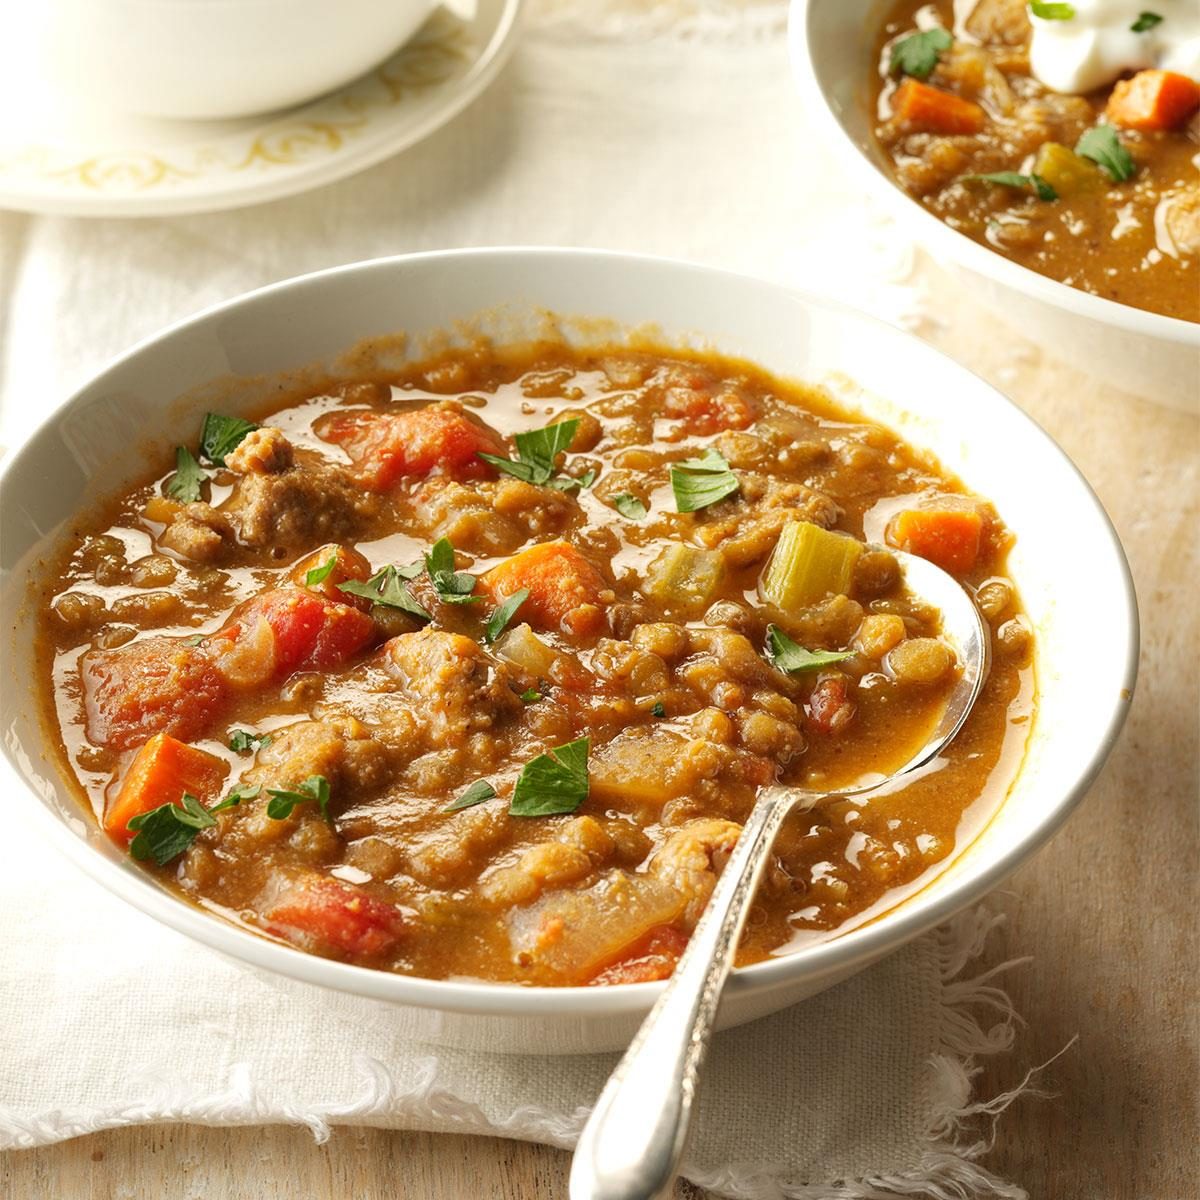 Turkey Sausage and Lentil Soup Recipe: How to Make It